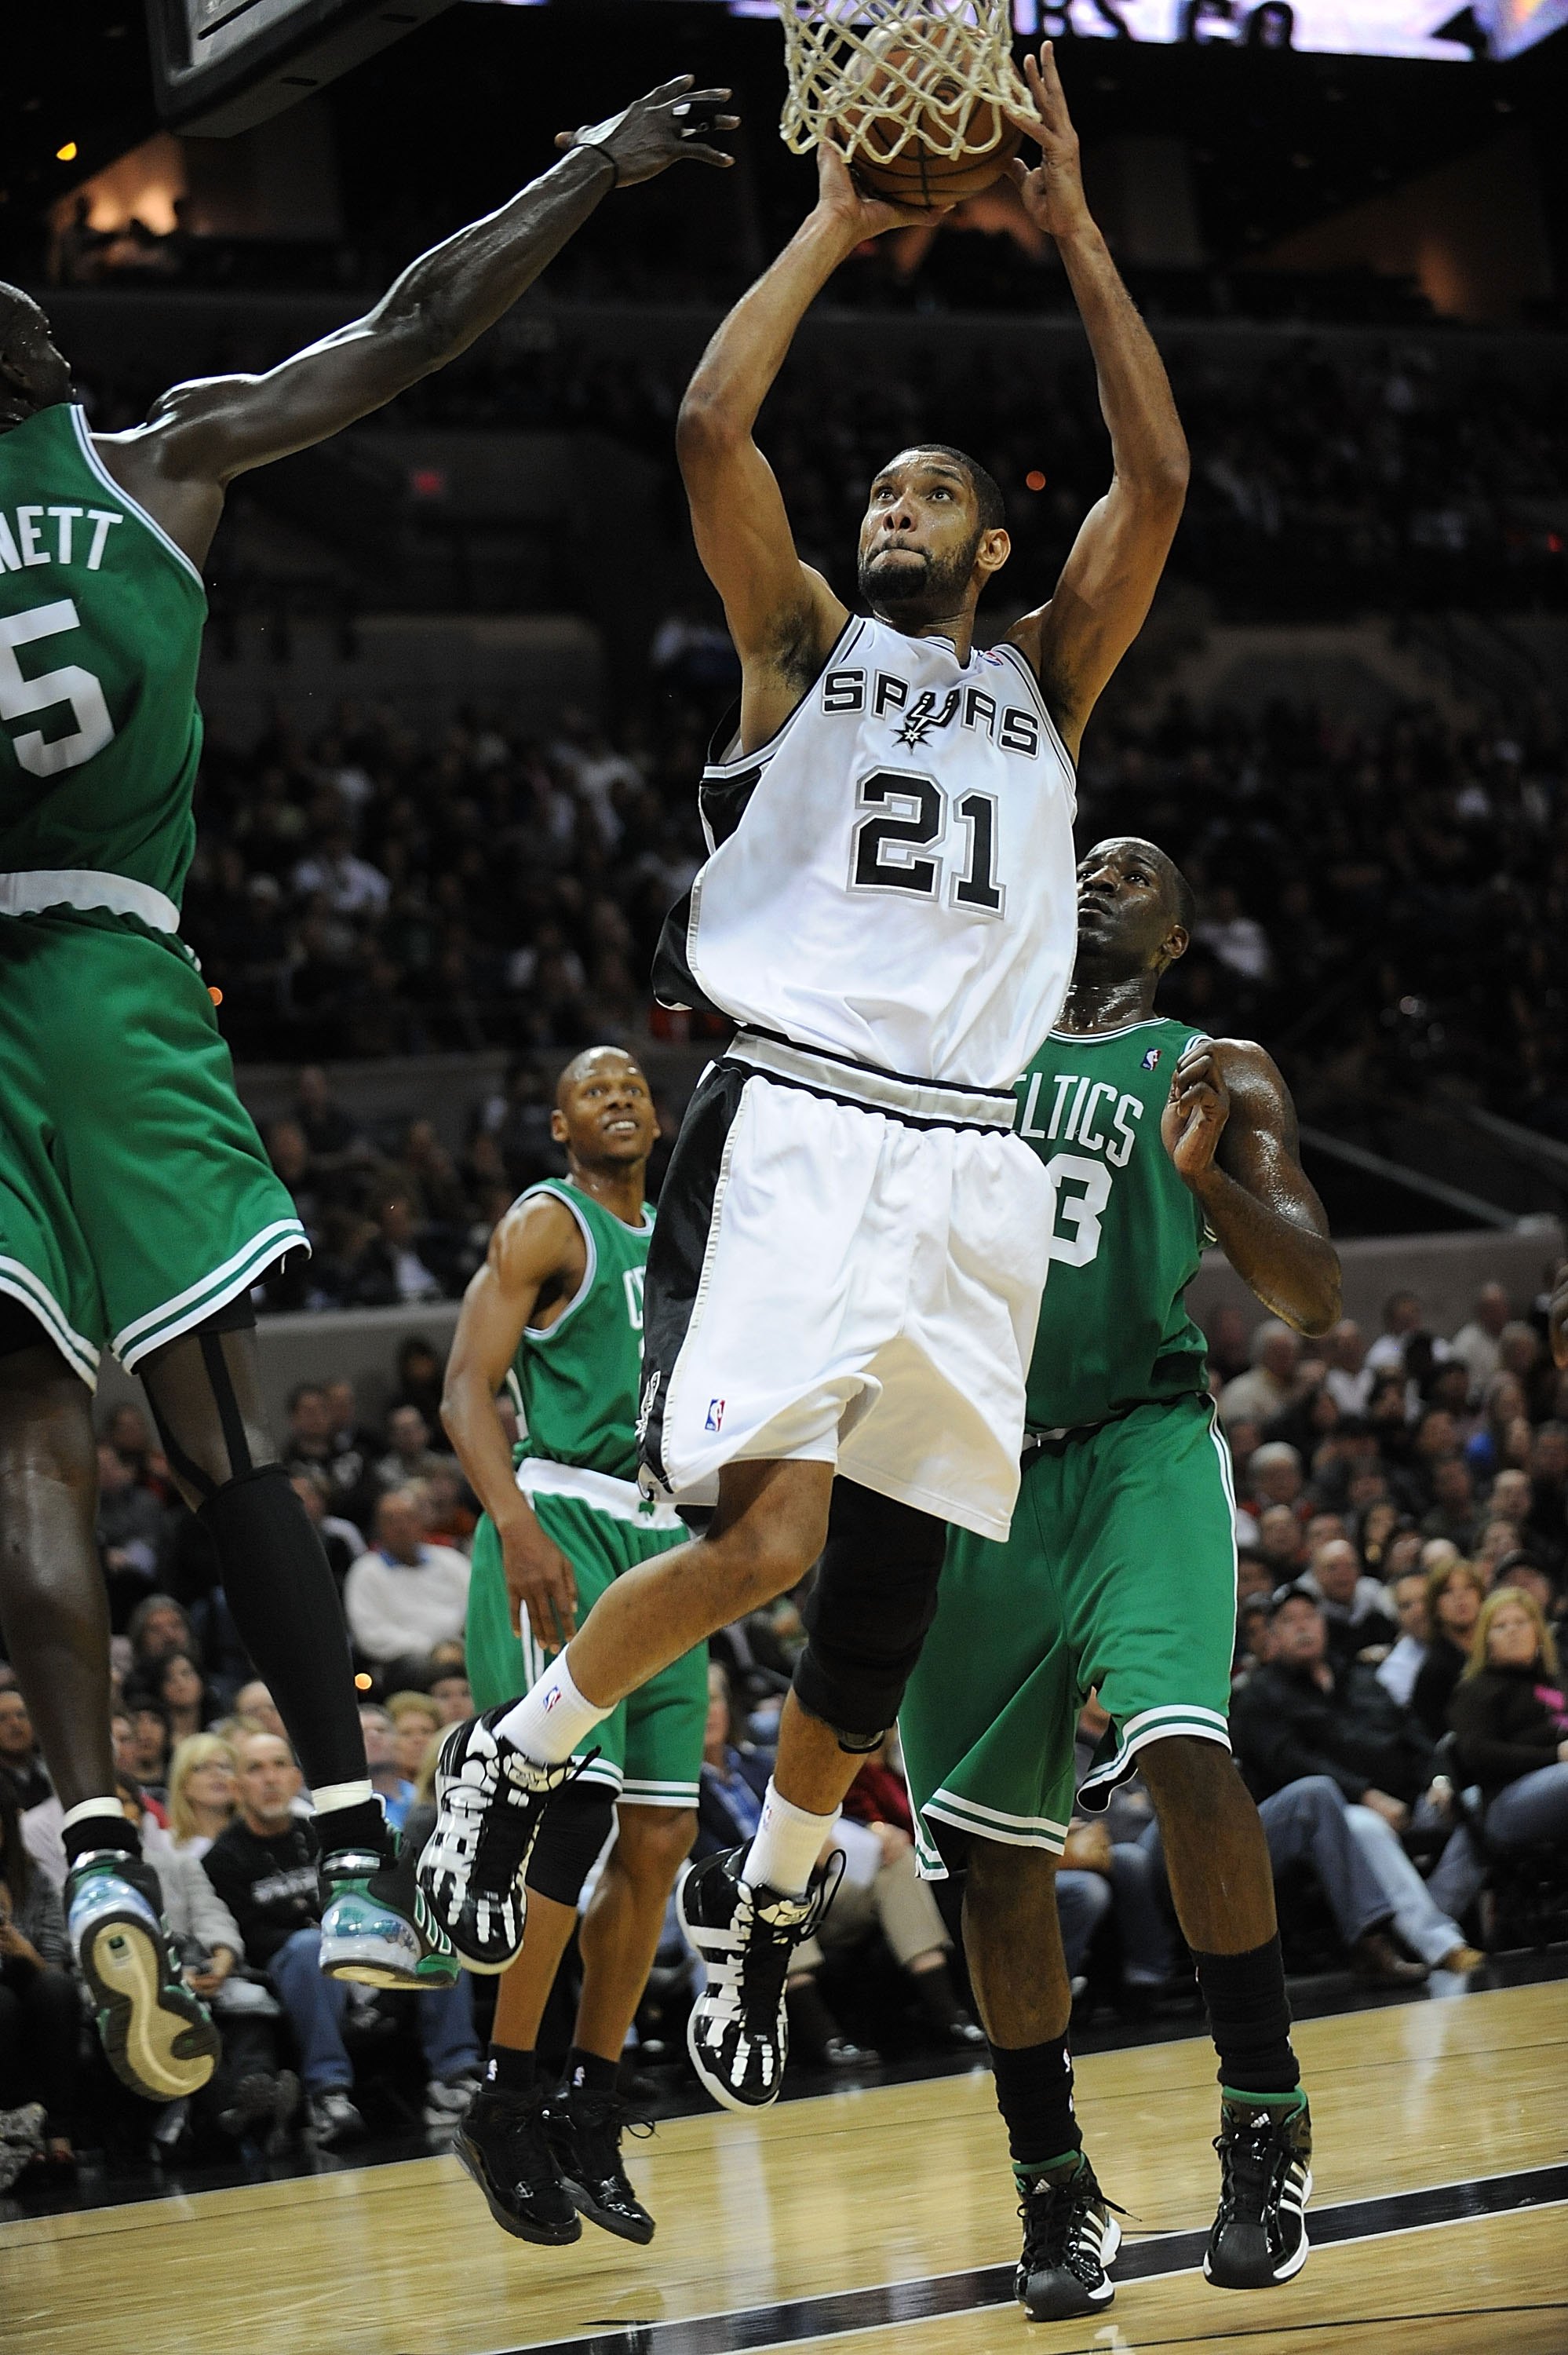 SAN ANTONIO - DECEMBER 03:  Forward Tim Duncan #21 of the San Antonio Spurs takes a shot against Kevin Garnett #5 of the Boston Celtics on December 3, 2009 at AT&T Center in San Antonio, Texas.  NOTE TO USER: User expressly acknowledges and agrees that, b